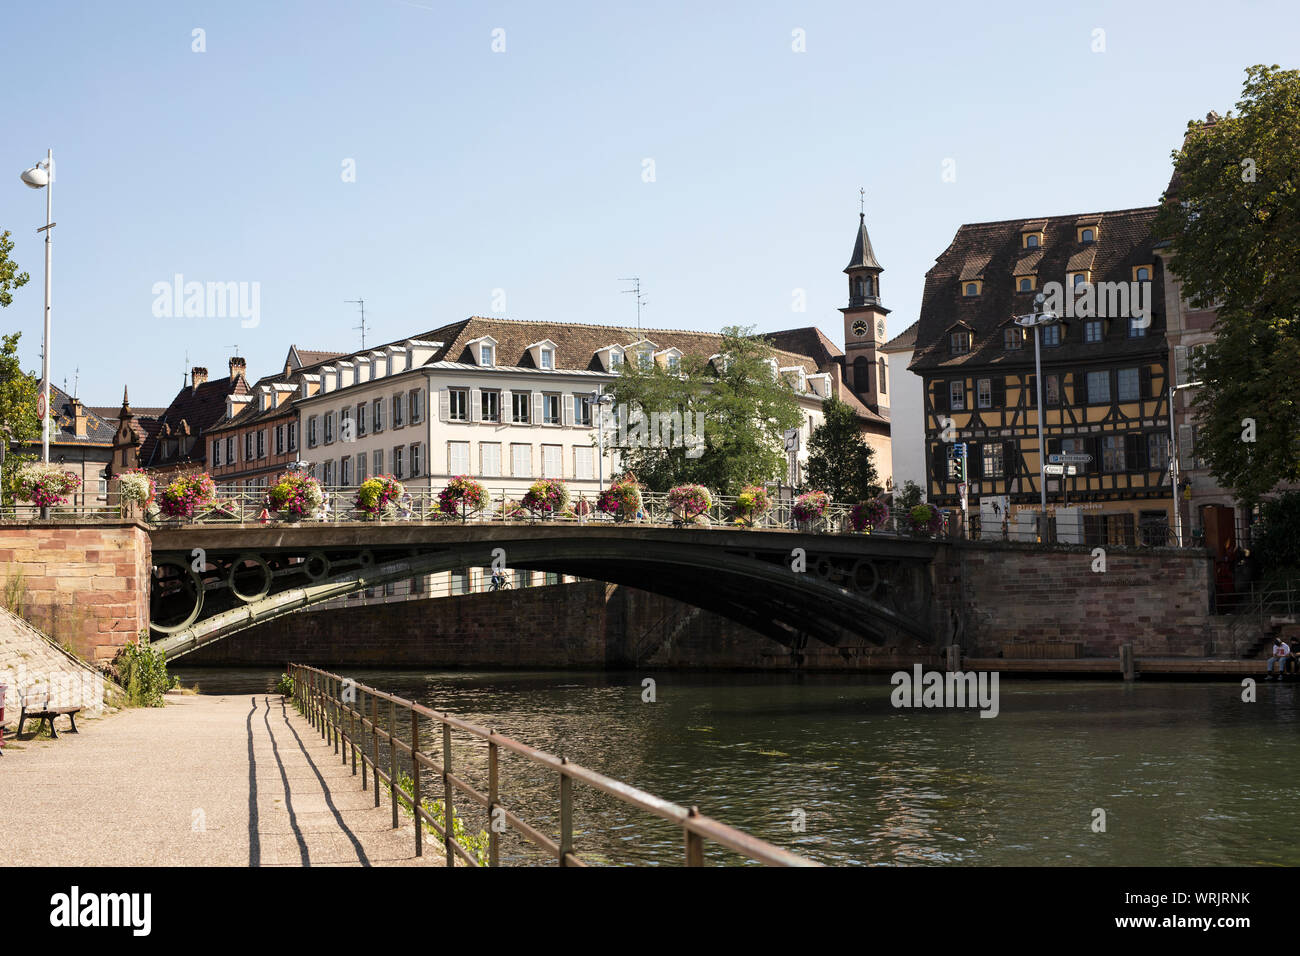 The Pont Saint Thomas bridge over the canal in the Petite France neighborhood of Strasbourg, France, near the Saint-Louis de Strasbourg church. Stock Photo